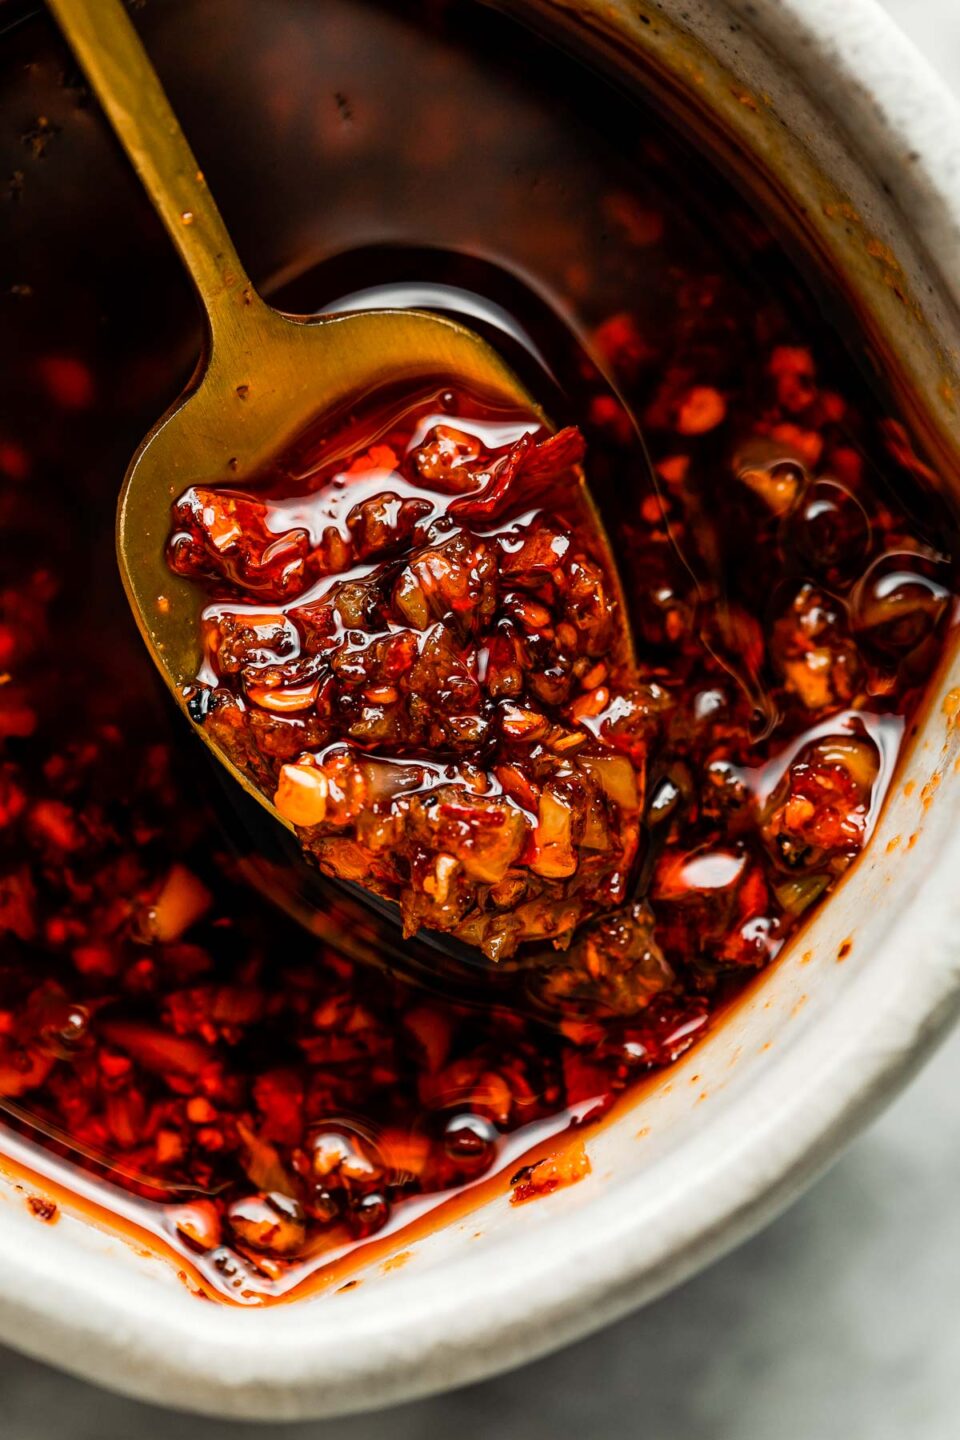 A close-up macro shot of a spoon of spicy chili oil being held up over a small bowl of spicy chili oil.